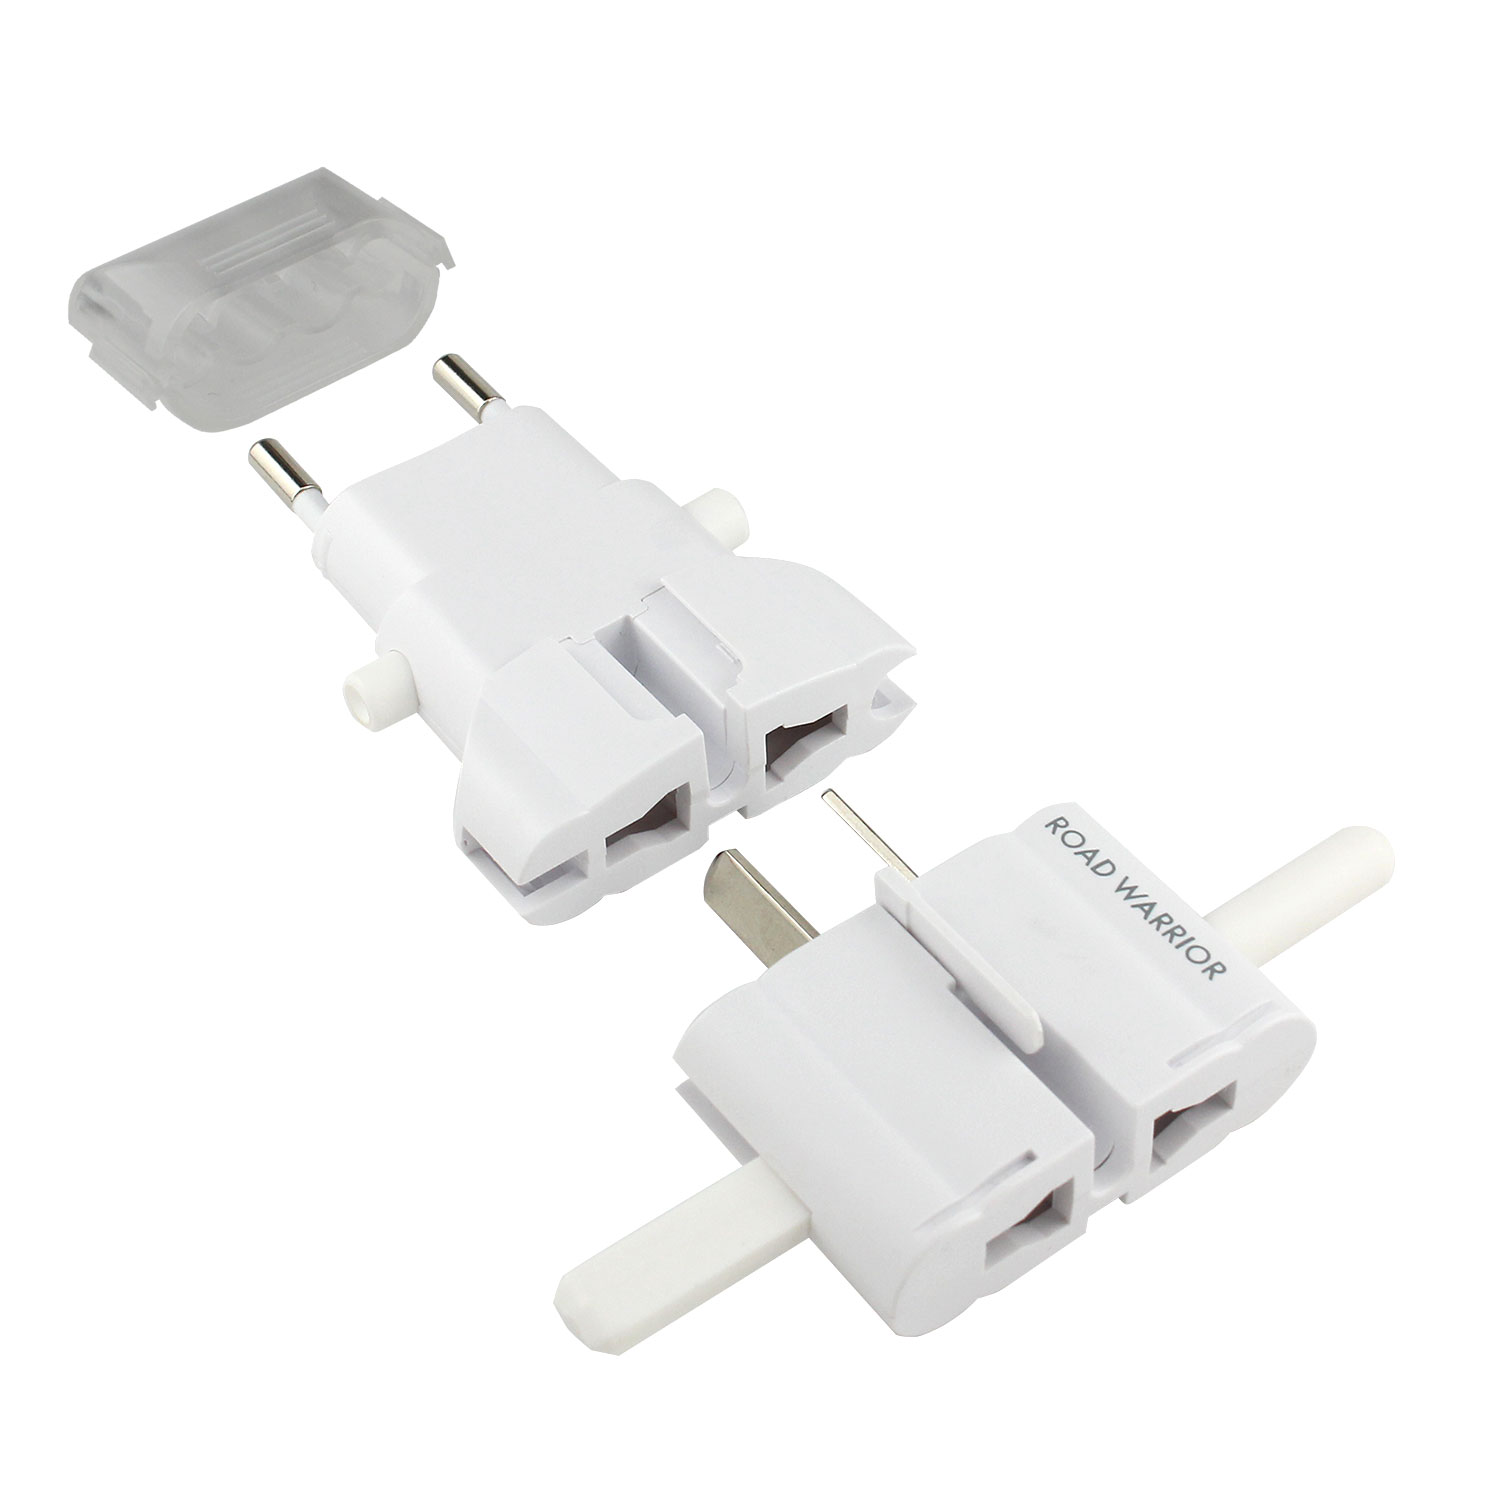 ROAD WARRIOR Travel Adapter RW101WH White